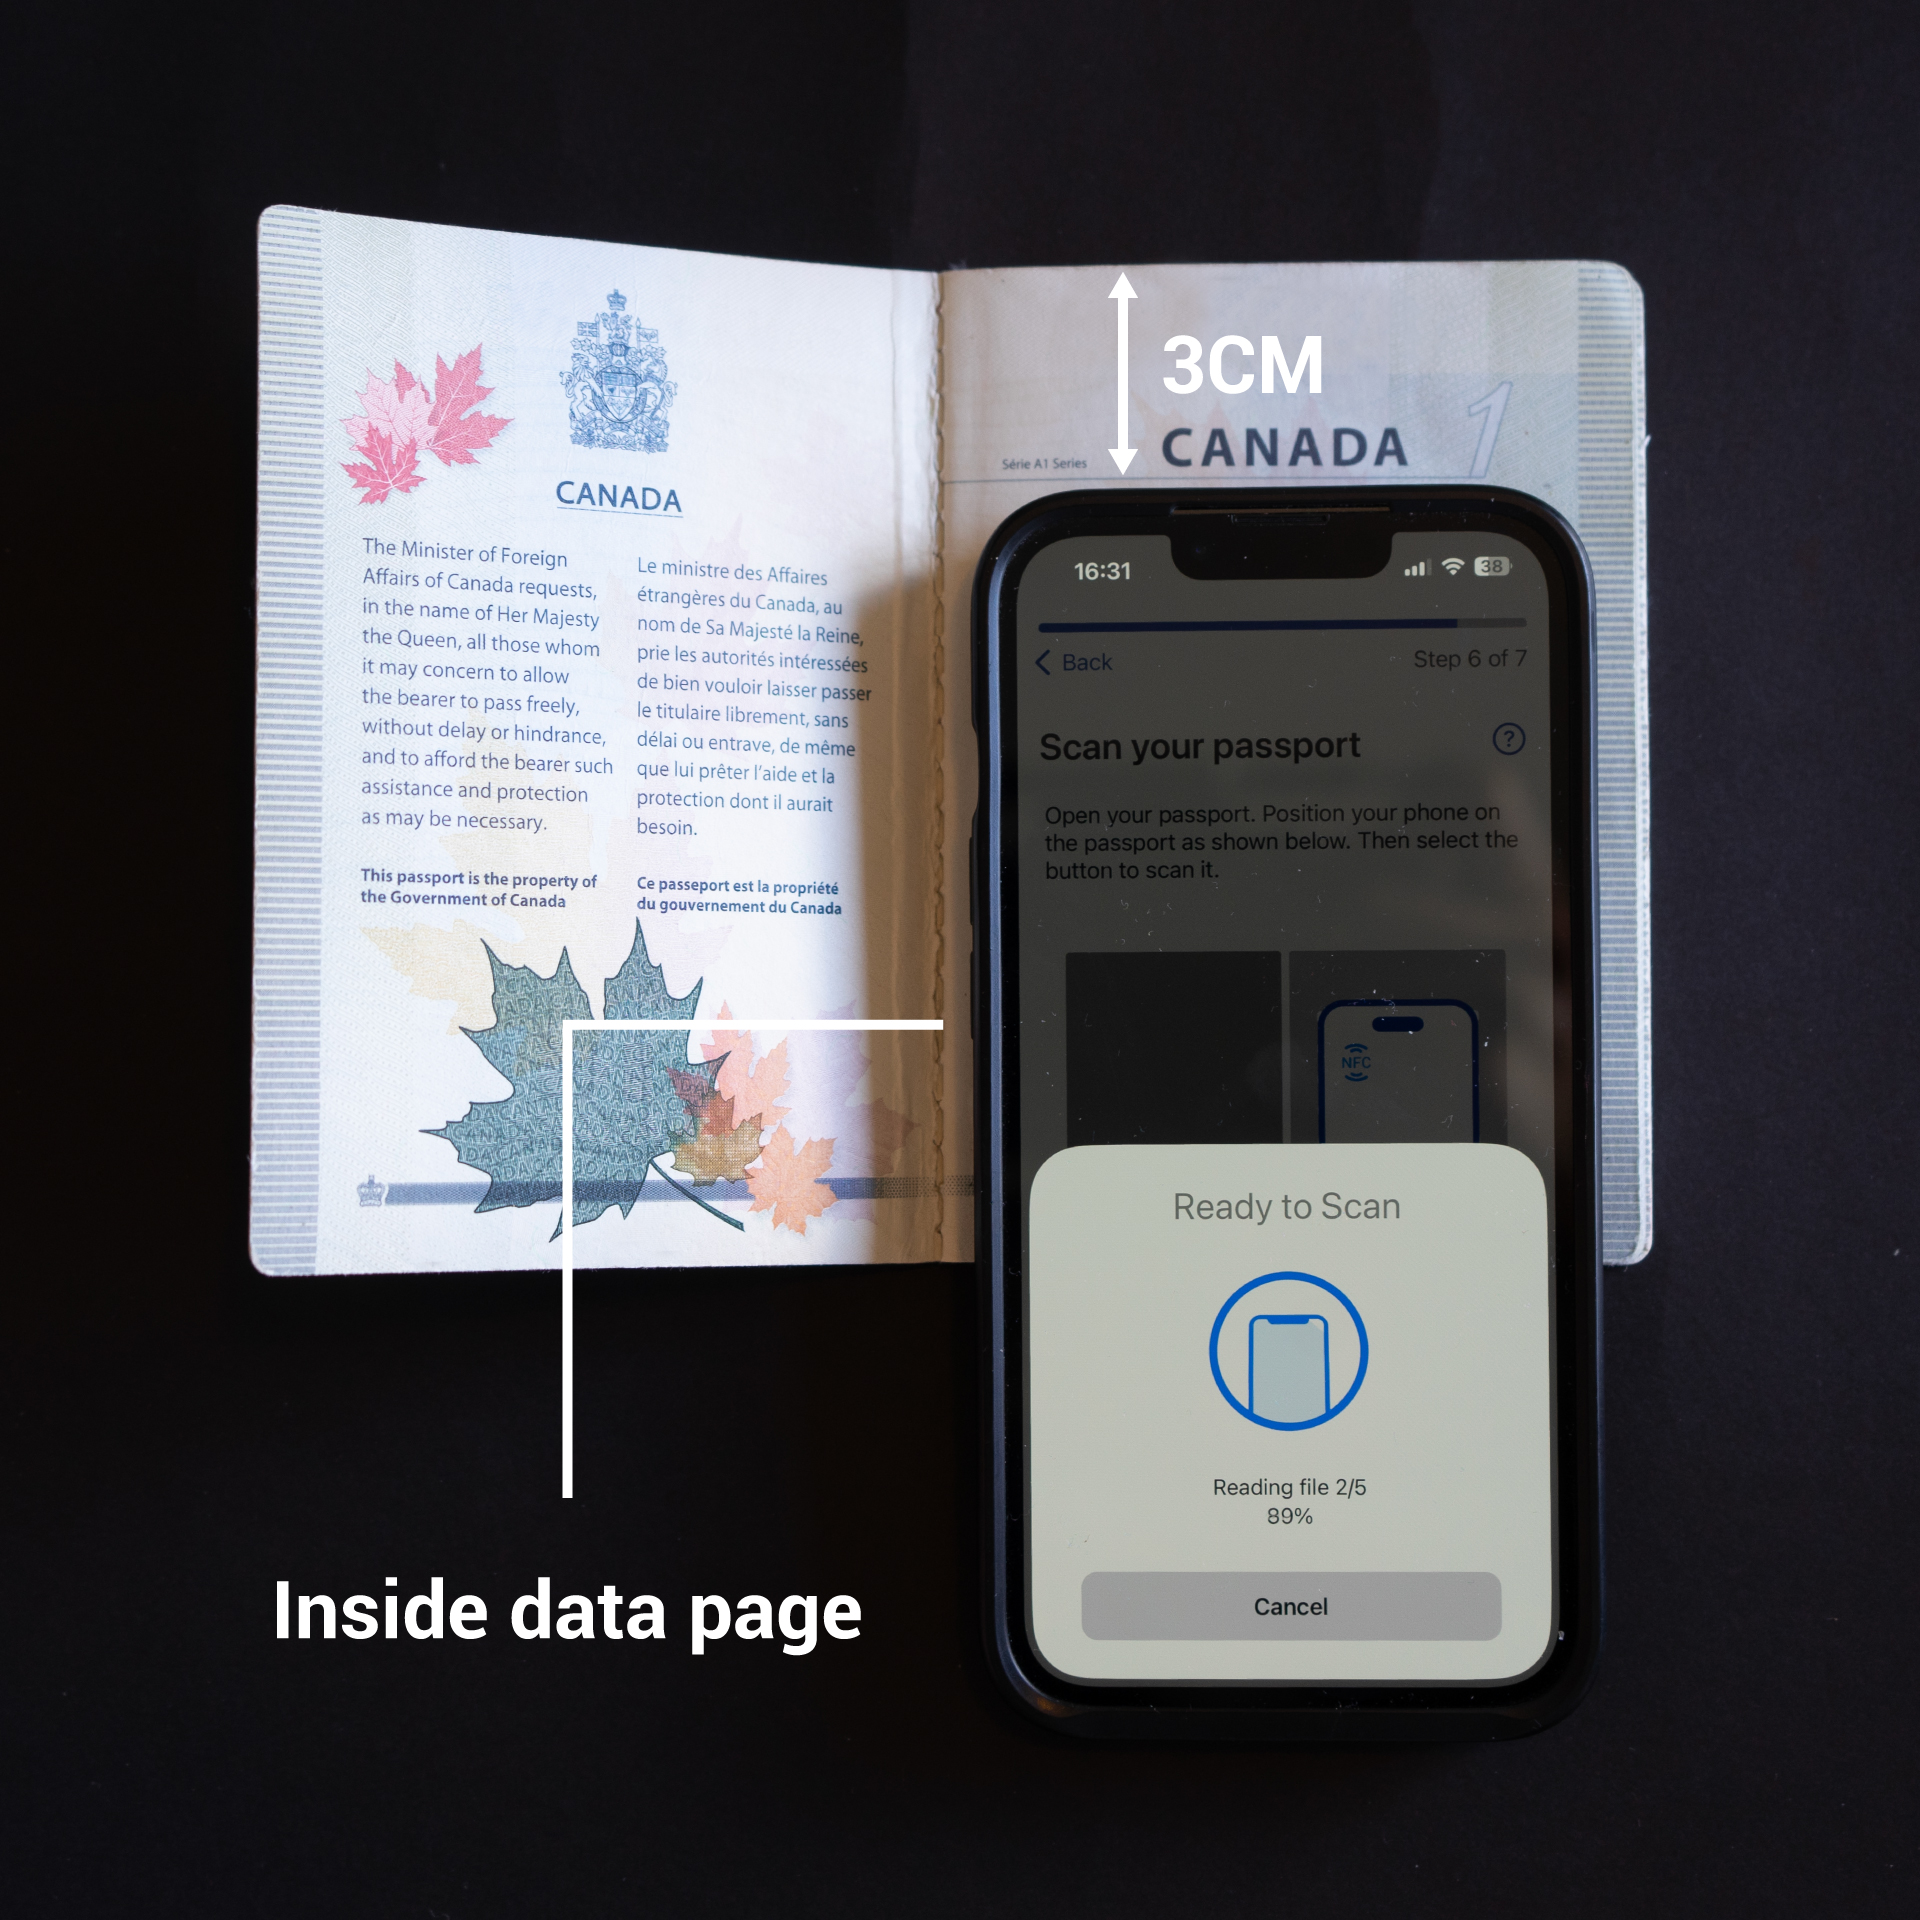 Place your mobile device directly on the inside data page with the top of the mobile device slightly below the top of your passport (about 3 cm down) for iOS